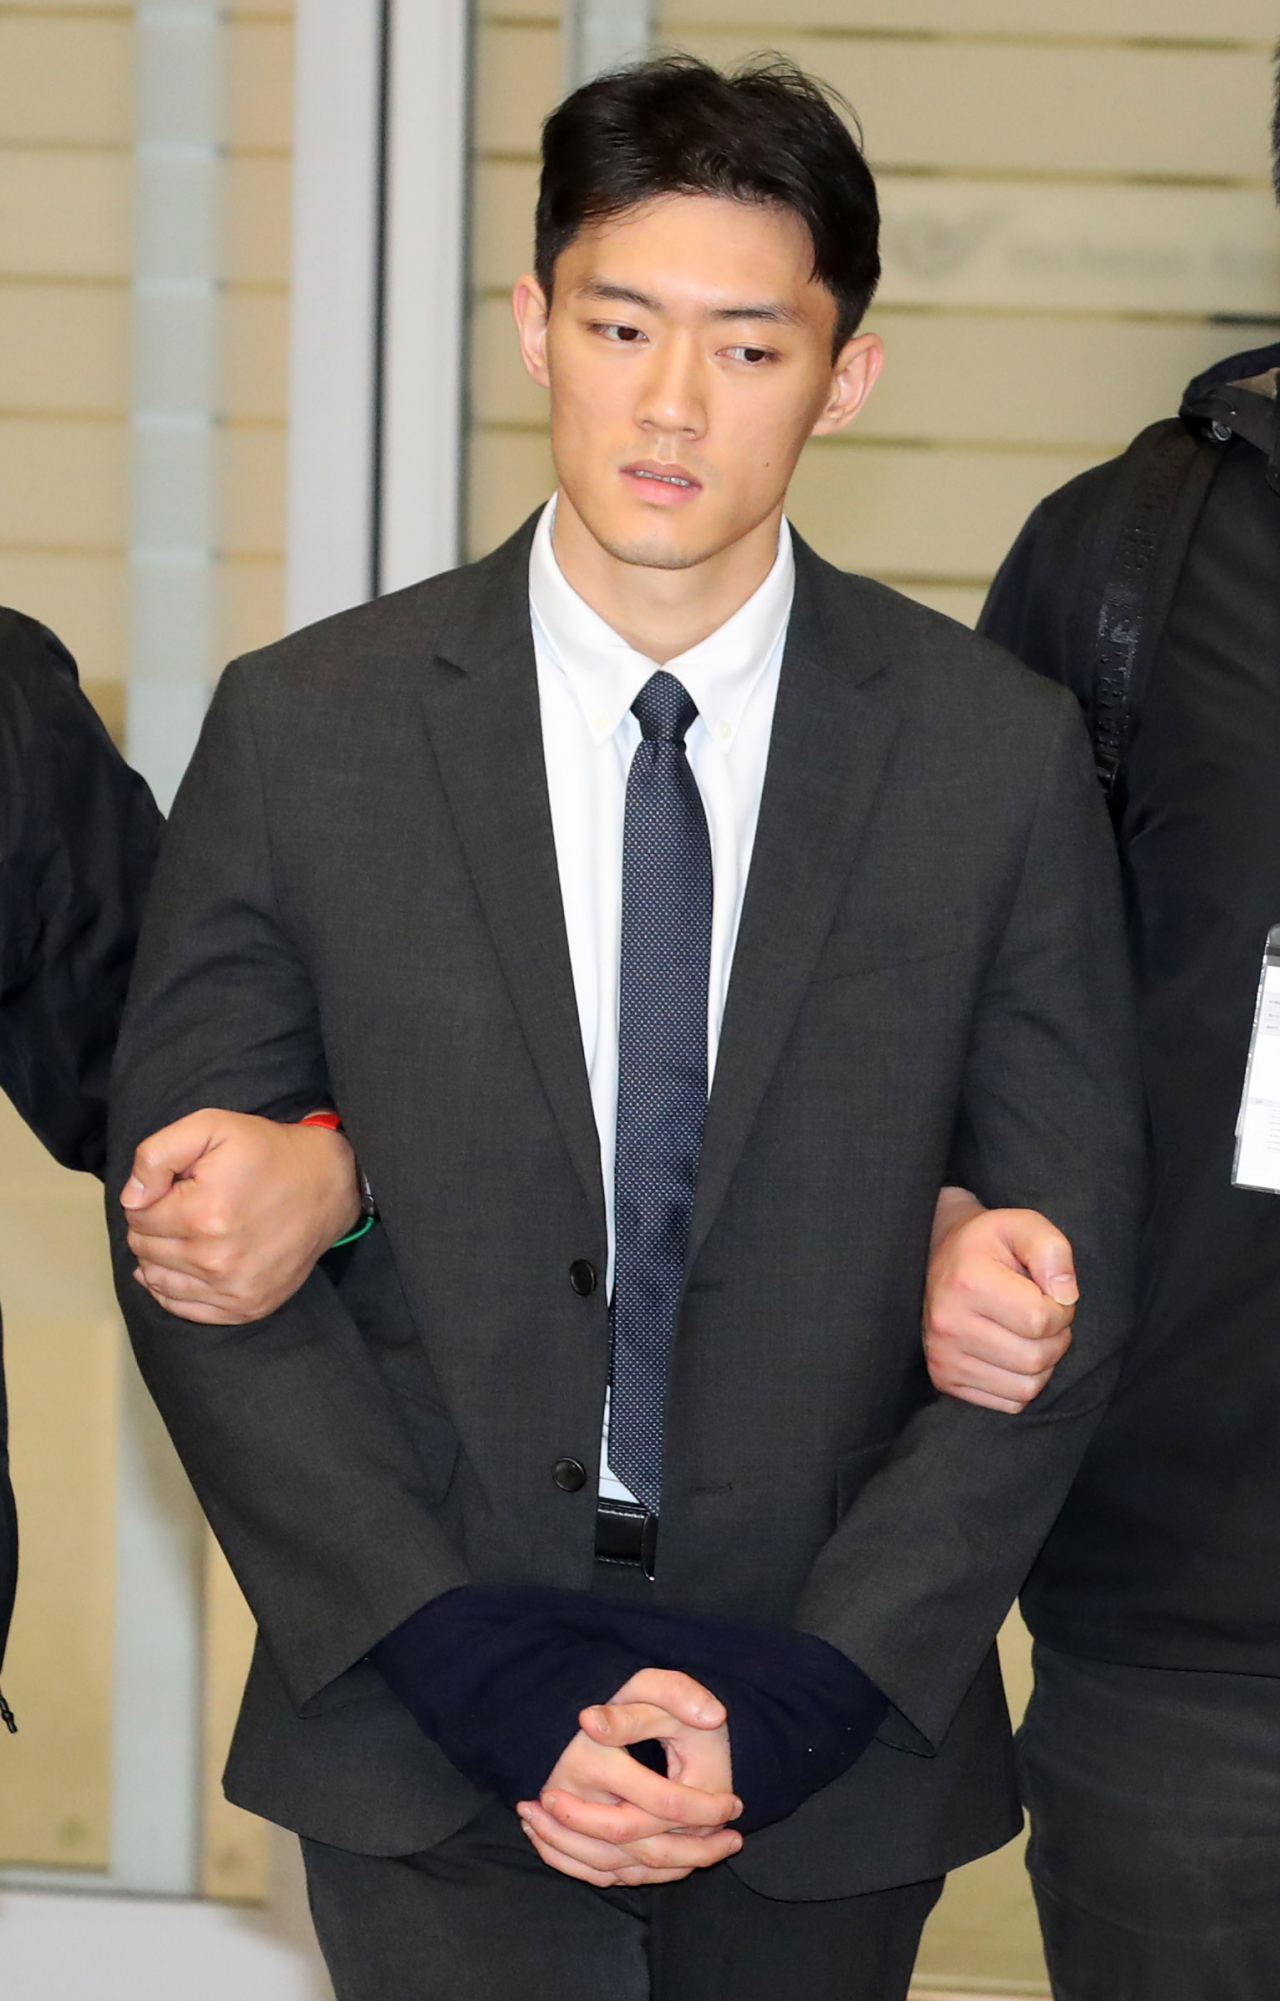 Chun Woo-won, the grandson of ex-President Chun Doo-hwan, was arrested on suspicion of illegal drug use upon entering the arrival gate of Incheon International Airport Terminal 2, Tuesday. (Lee Sang-sub/The Korea Herald)